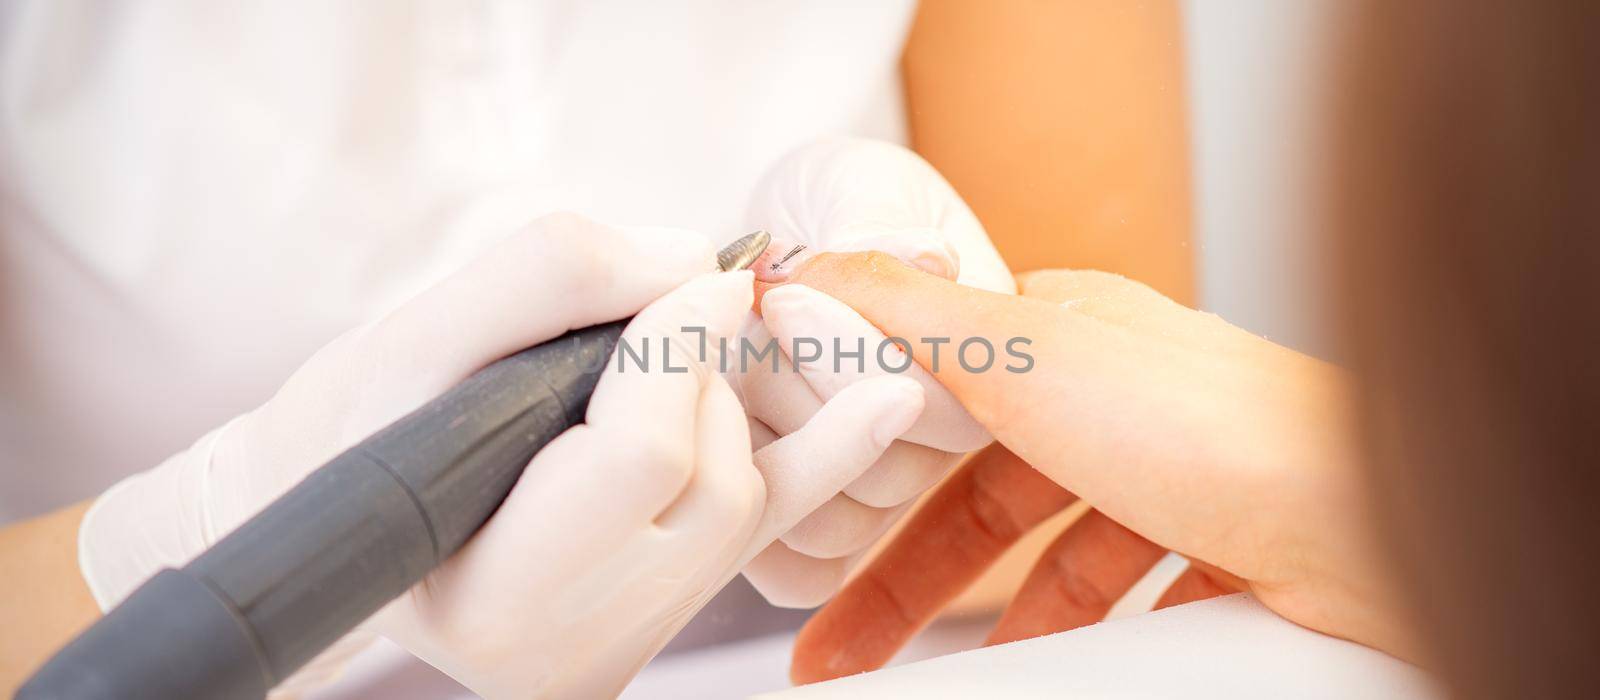 Closeup of manicure master in white gloves applying an electric nail file drill to remove the nail polish in the beauty salon